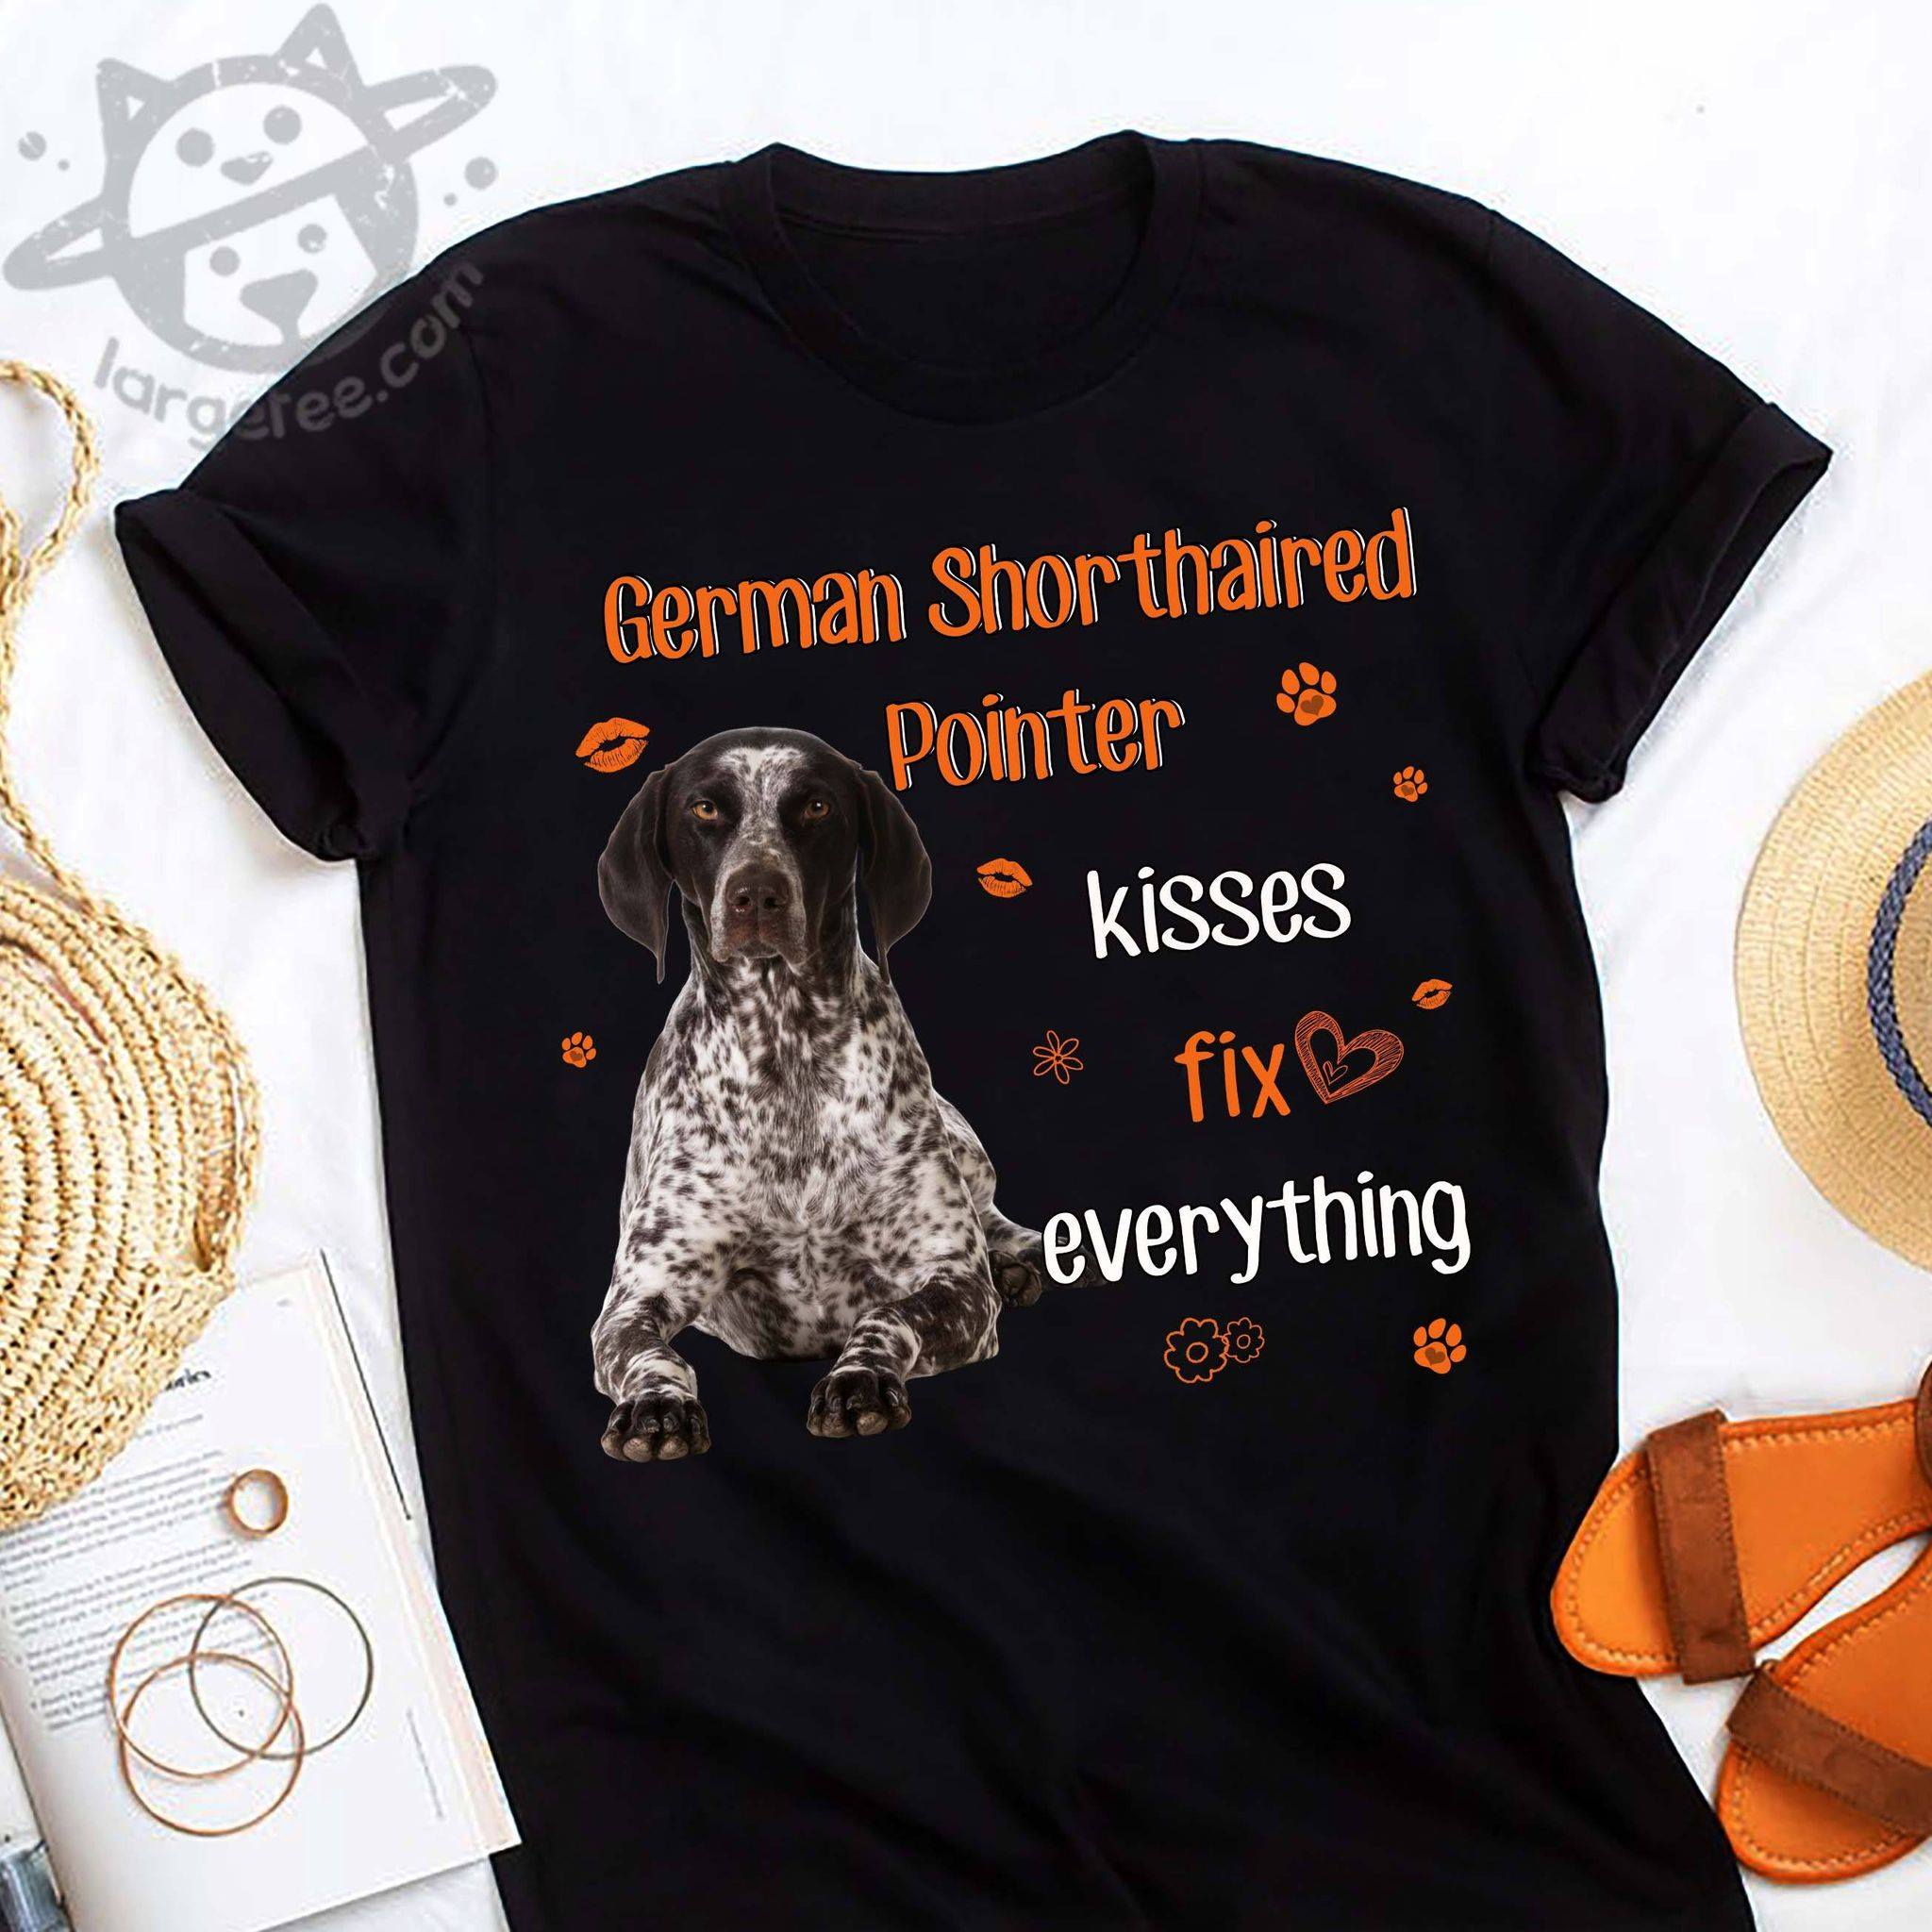 German Shorthaired pointer kisses fix everything